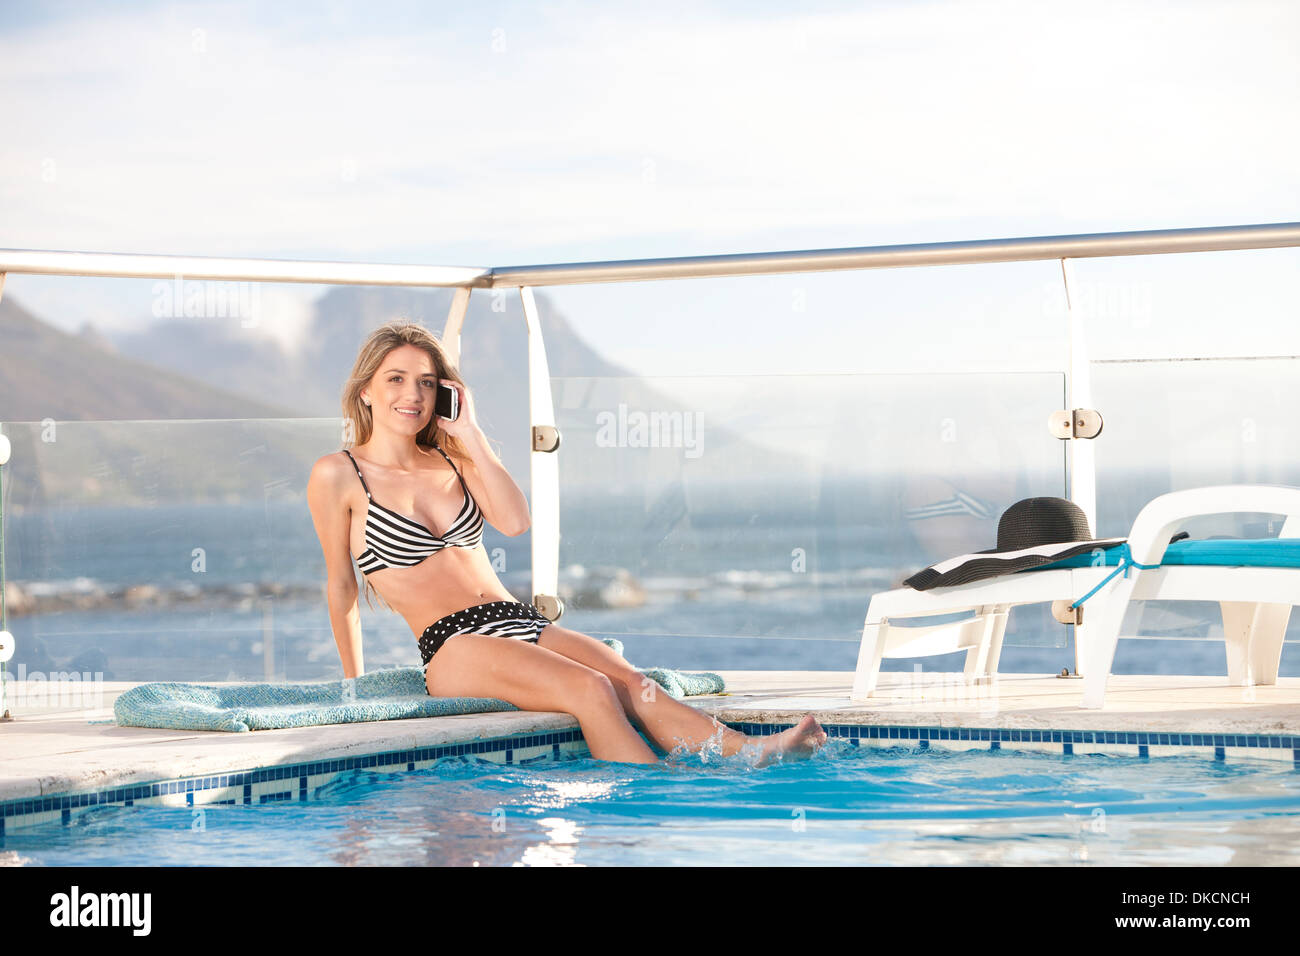 Woman using cellular phone by swimming pool, Cape Town, South Africa Stock Photo